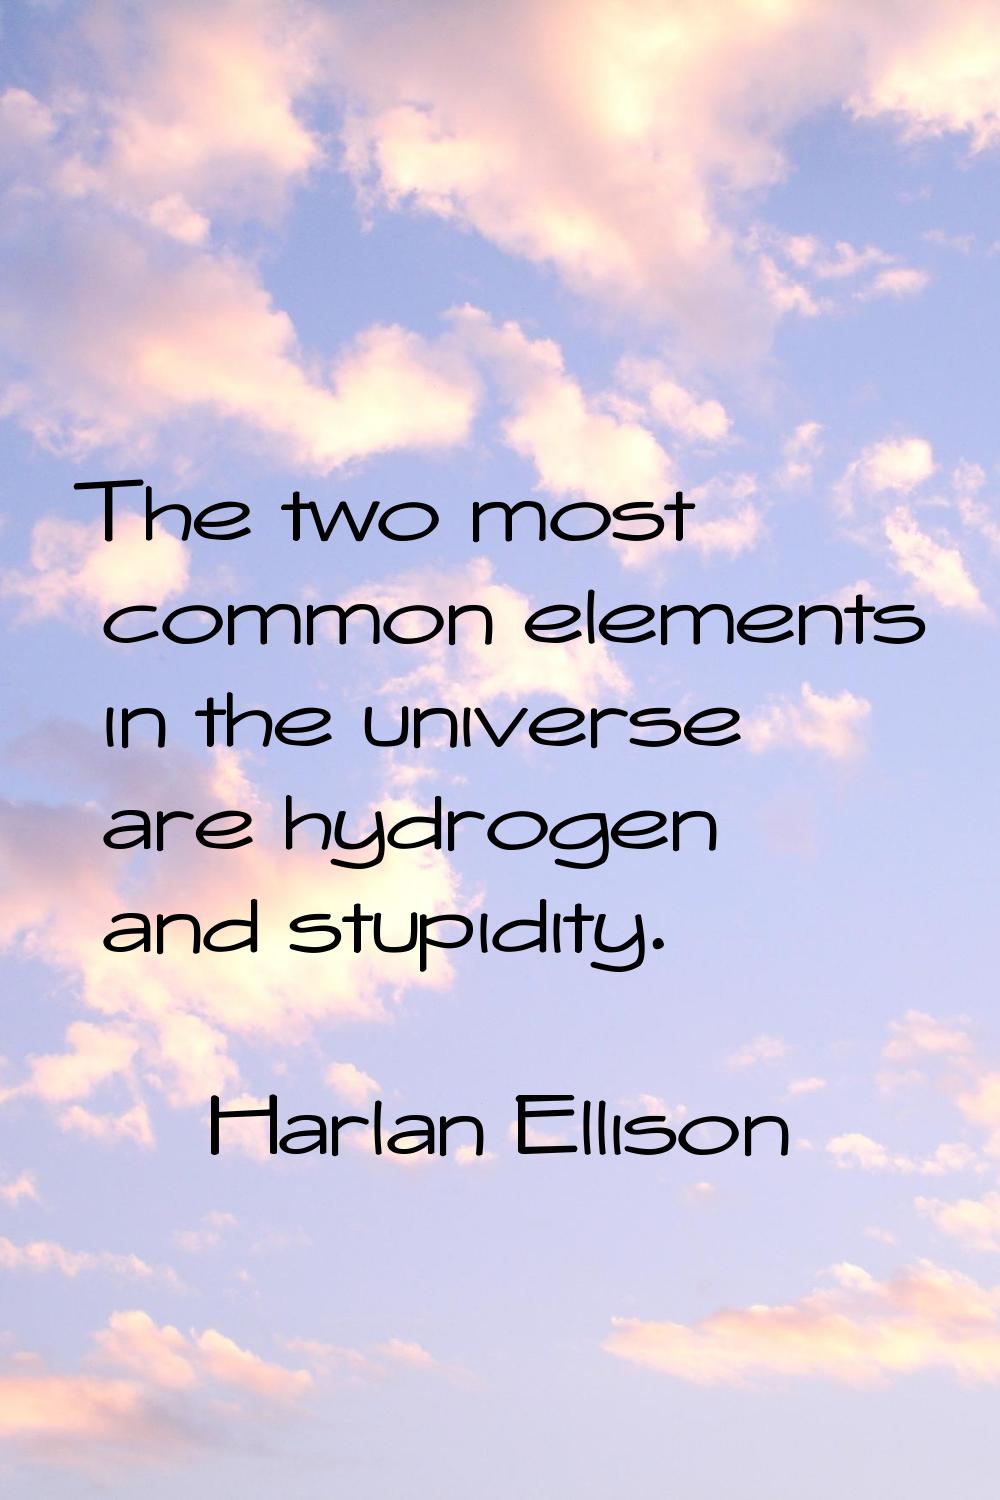 The two most common elements in the universe are hydrogen and stupidity.